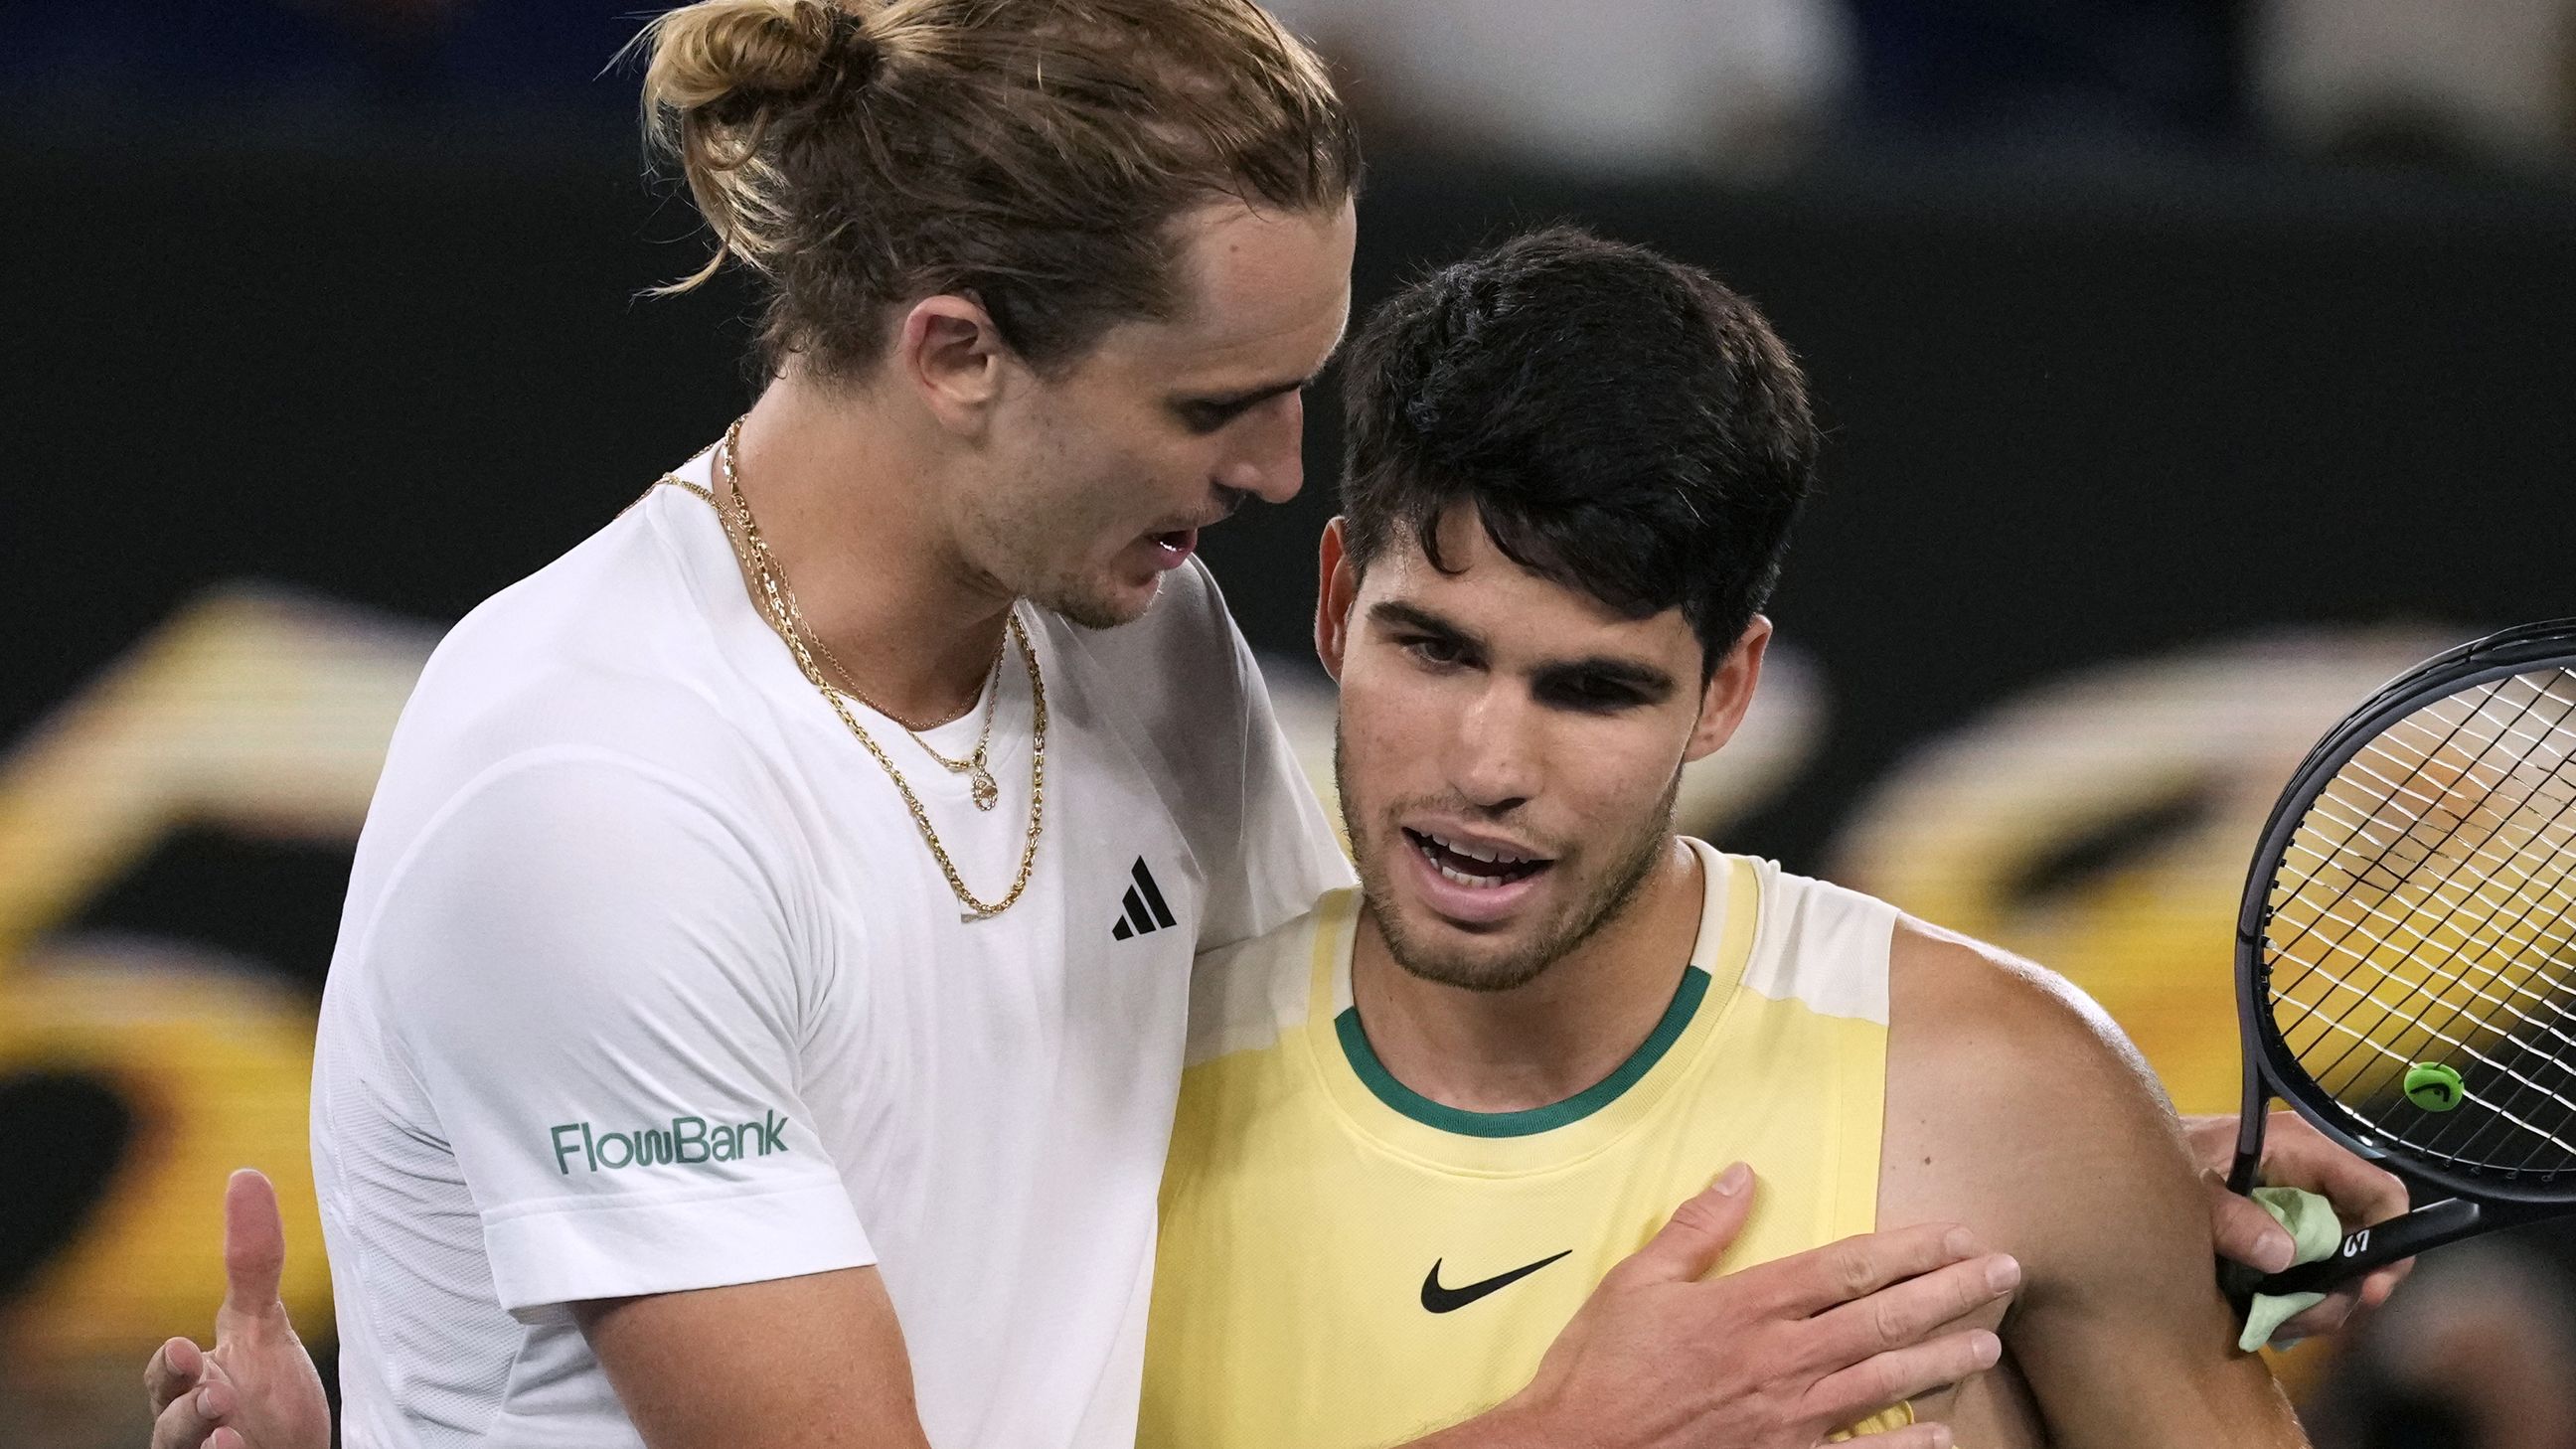 Alexander Zverev, left, of Germany is congratulated by Carlos Alcaraz of Spain following their quarterfinal match at the Australian Open.